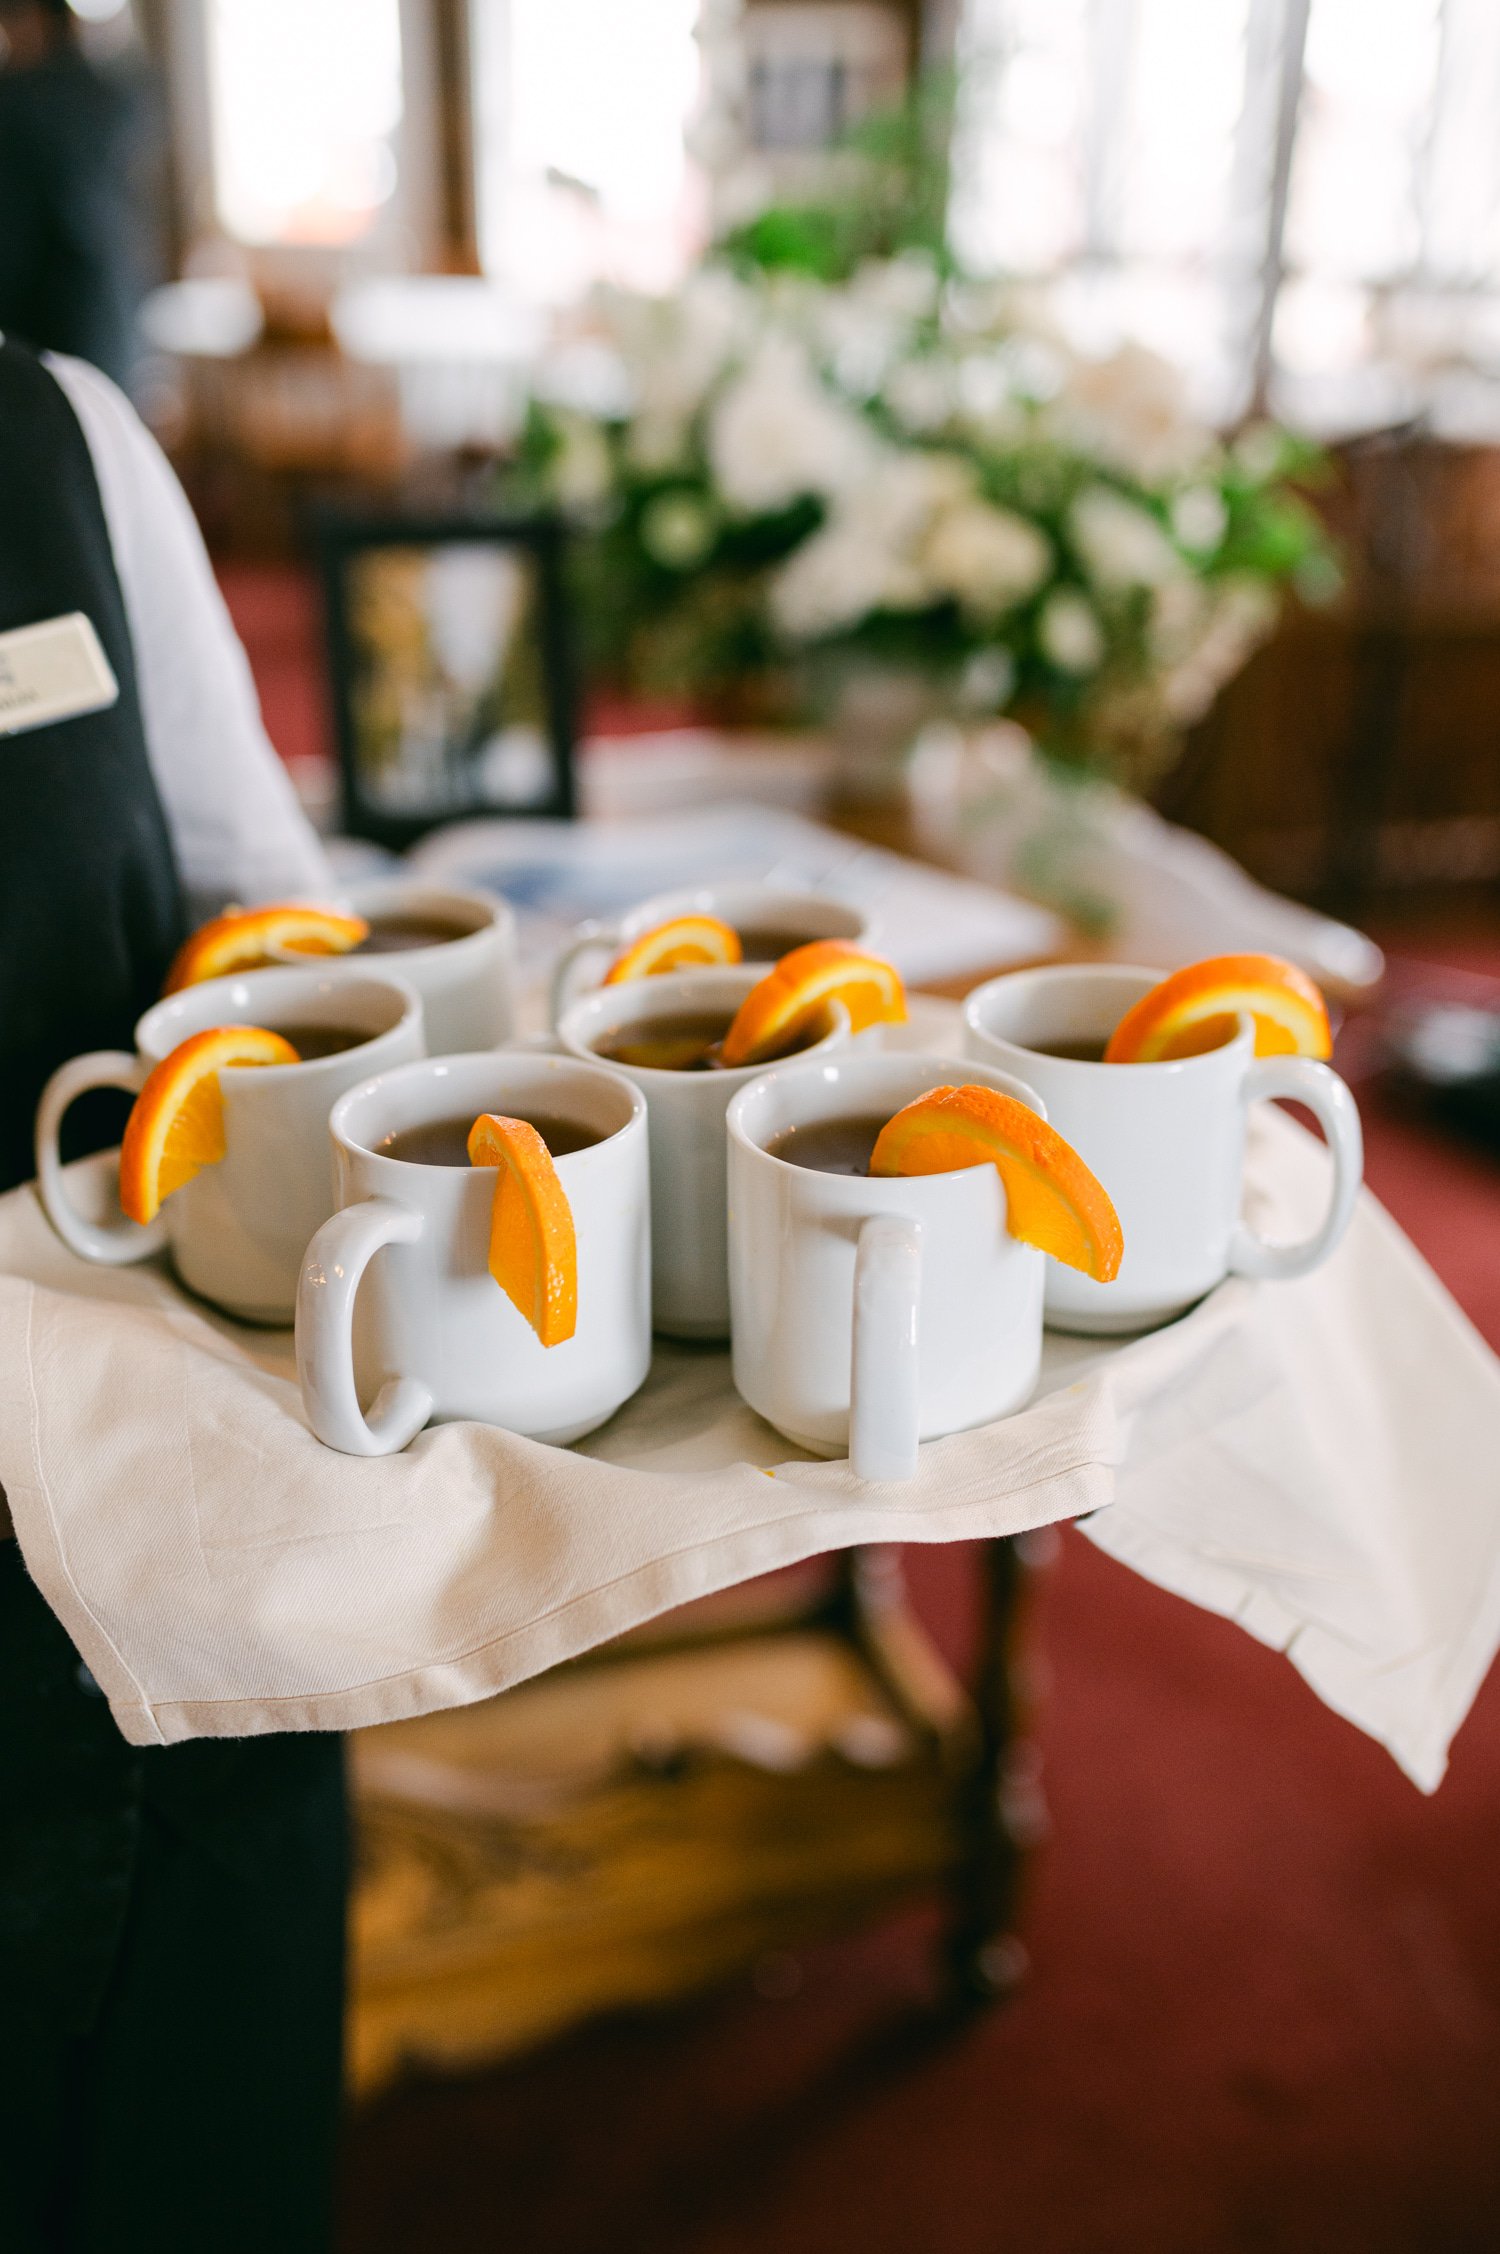 Sun Valley Roundhouse Wedding photos of the hot cocoa drink with orange served for the guests